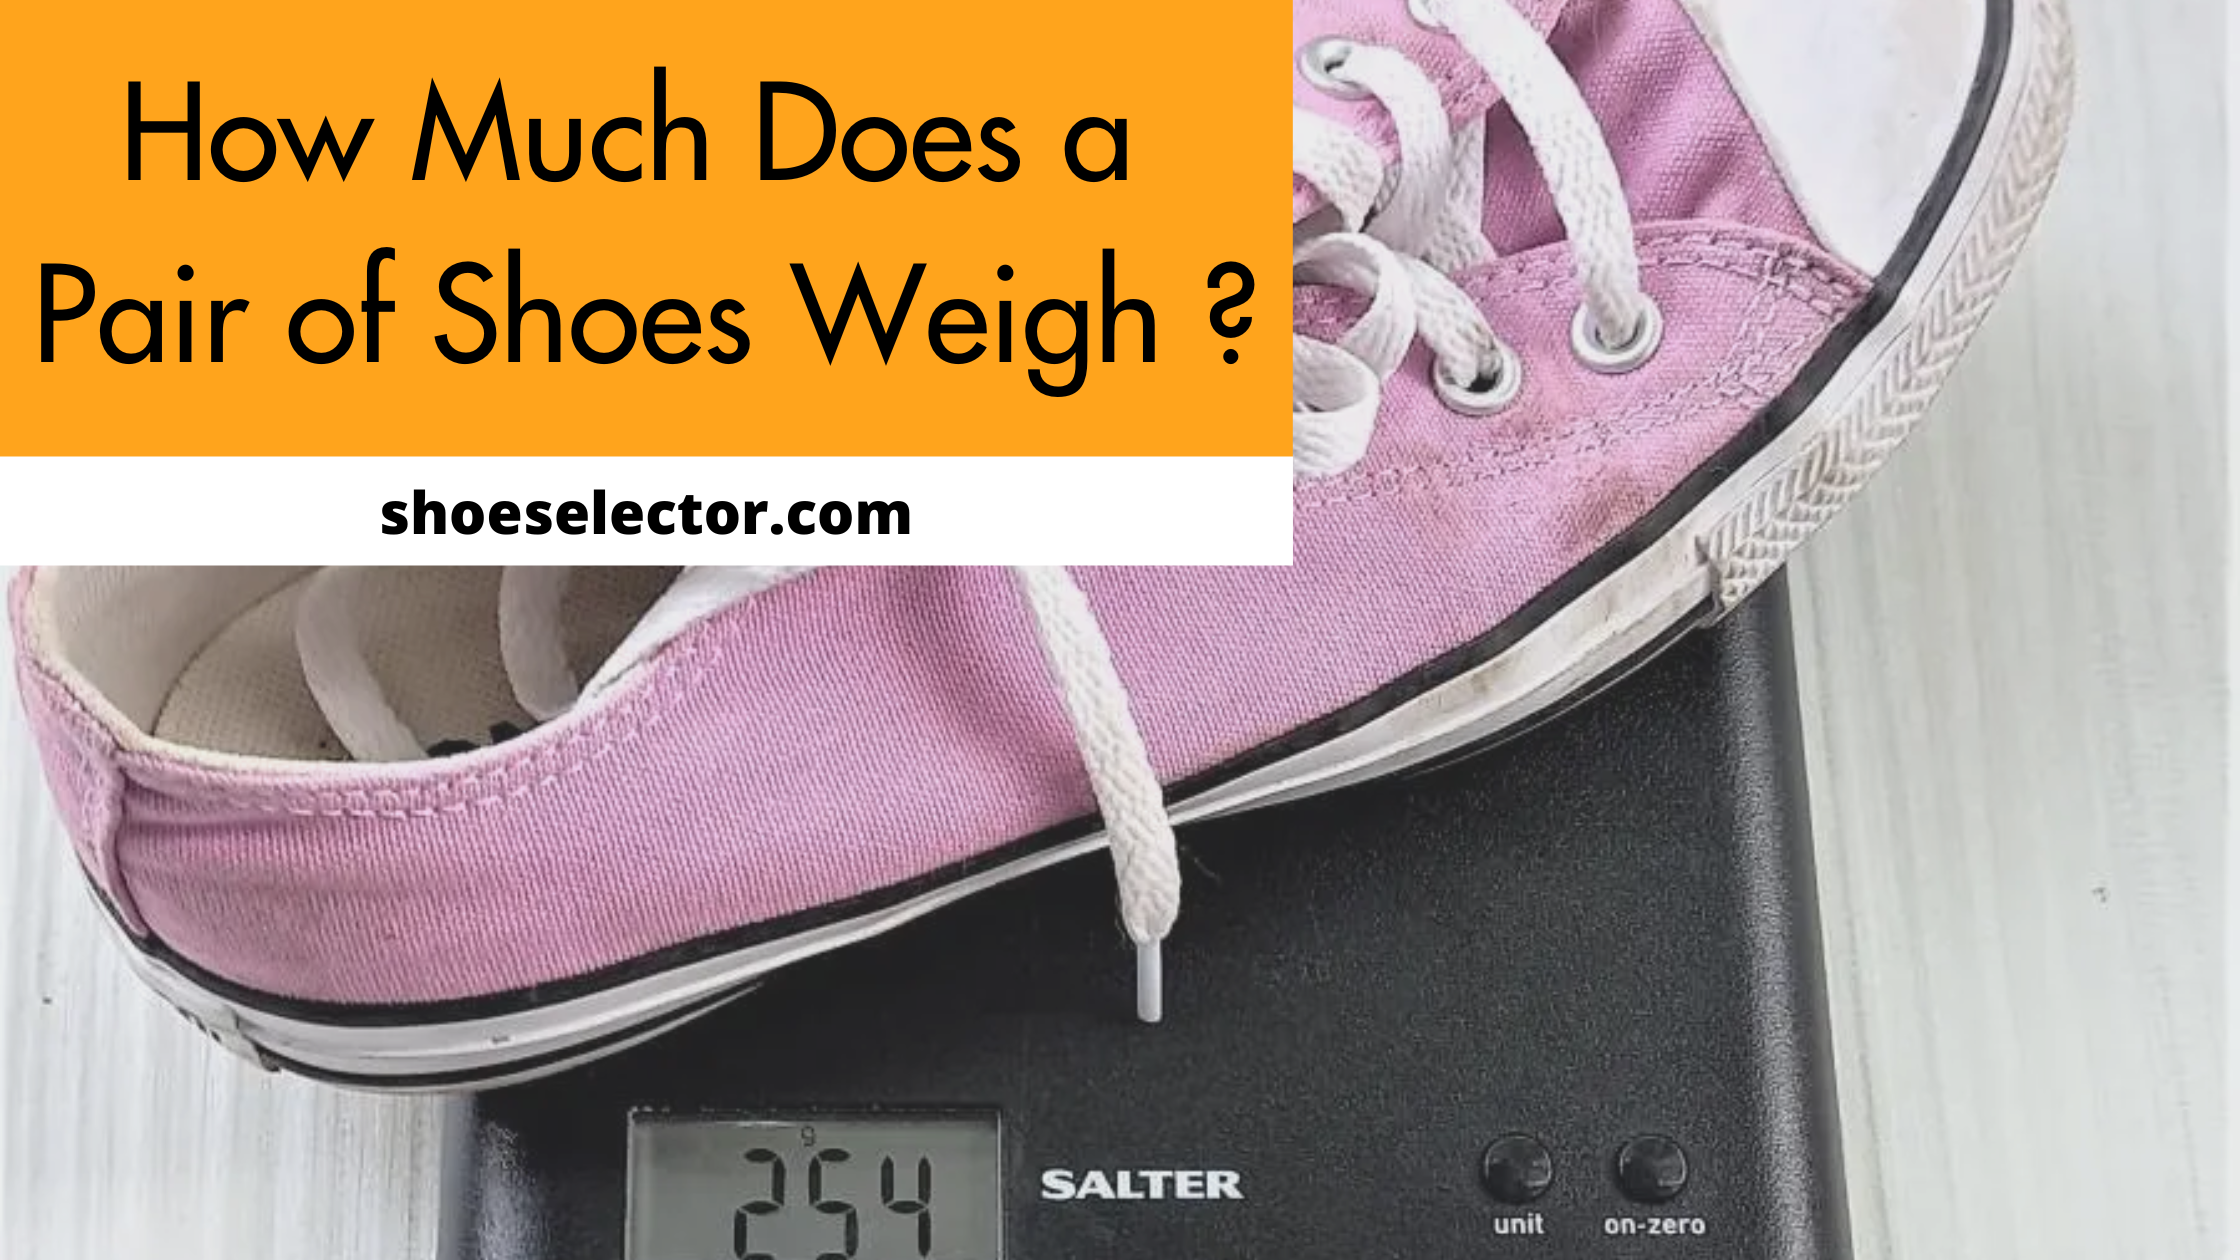 How Much Does a Pair of Shoes weigh? Simple & Quick 